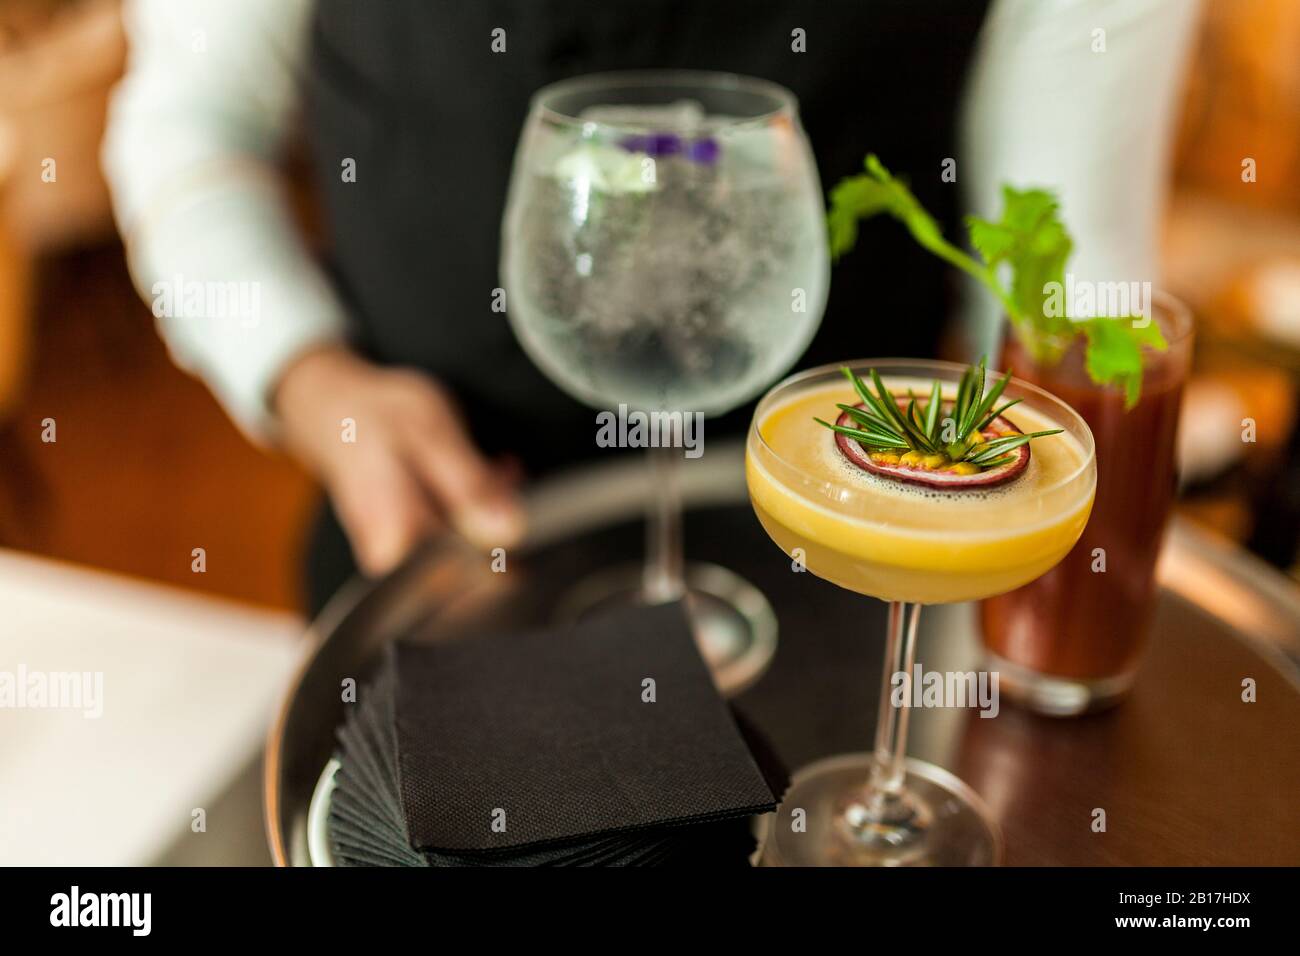 Waiter serving cocktails on silver tray Stock Photo